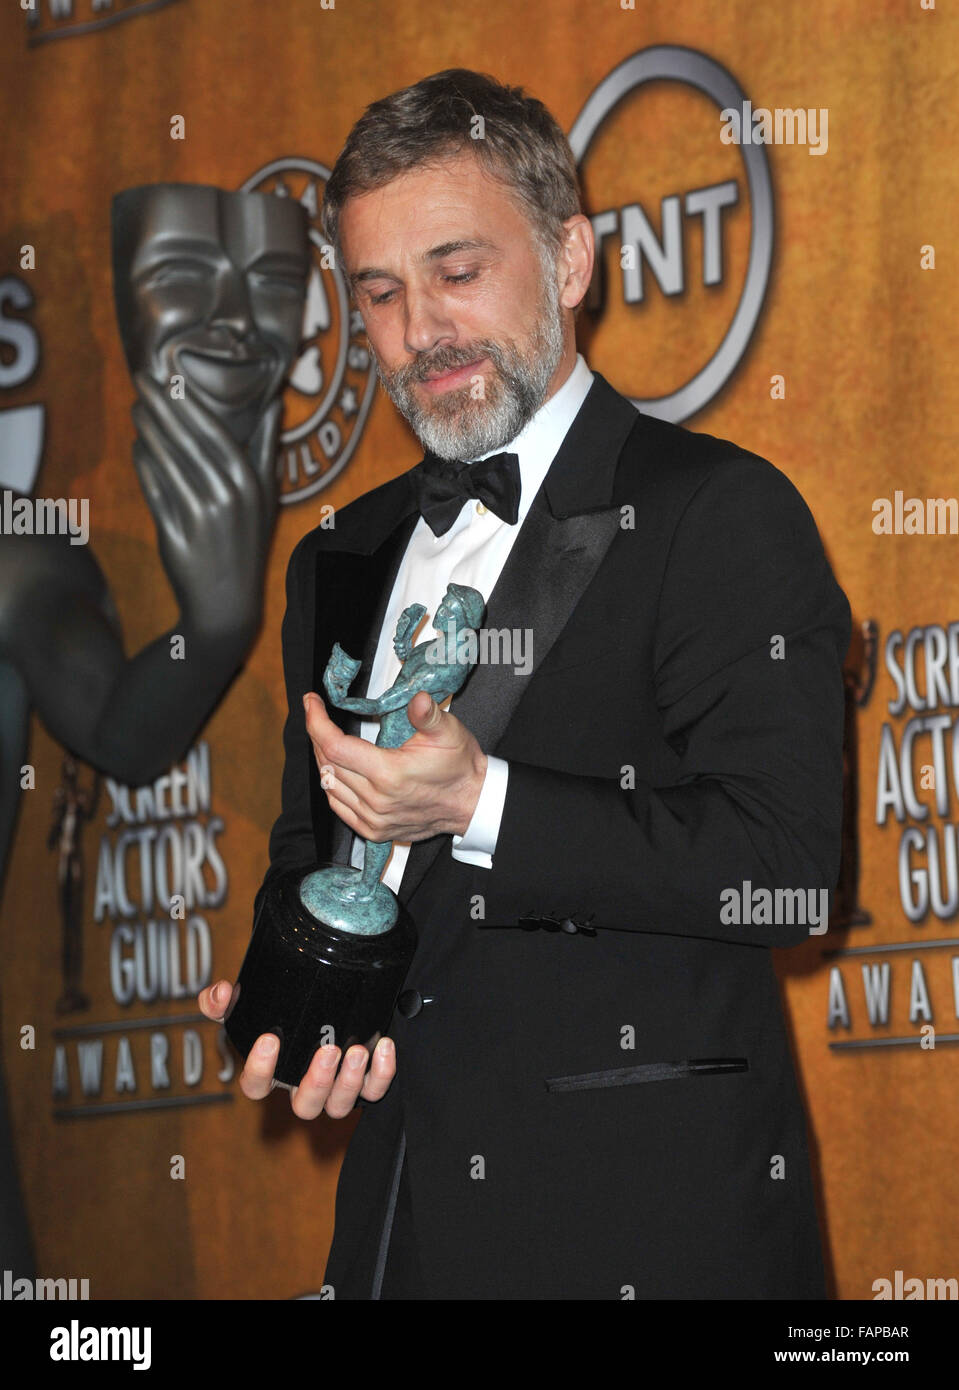 LOS ANGELES, CA - JANUARY 23, 2010: Christoph Waltz at the 16th Annual Screen Actors Guild Awards at the Shrine Auditorium. Stock Photo